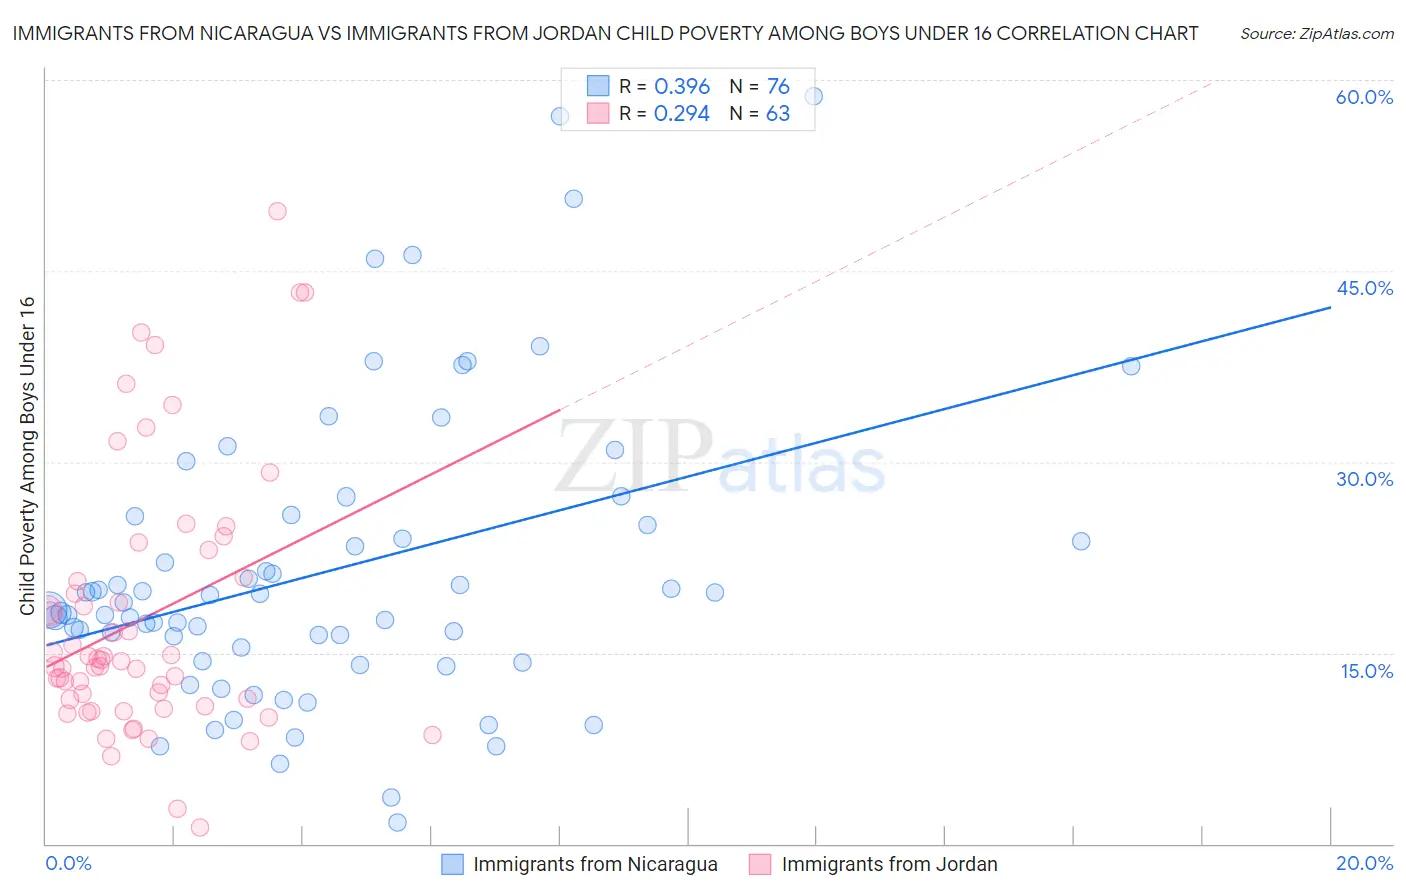 Immigrants from Nicaragua vs Immigrants from Jordan Child Poverty Among Boys Under 16